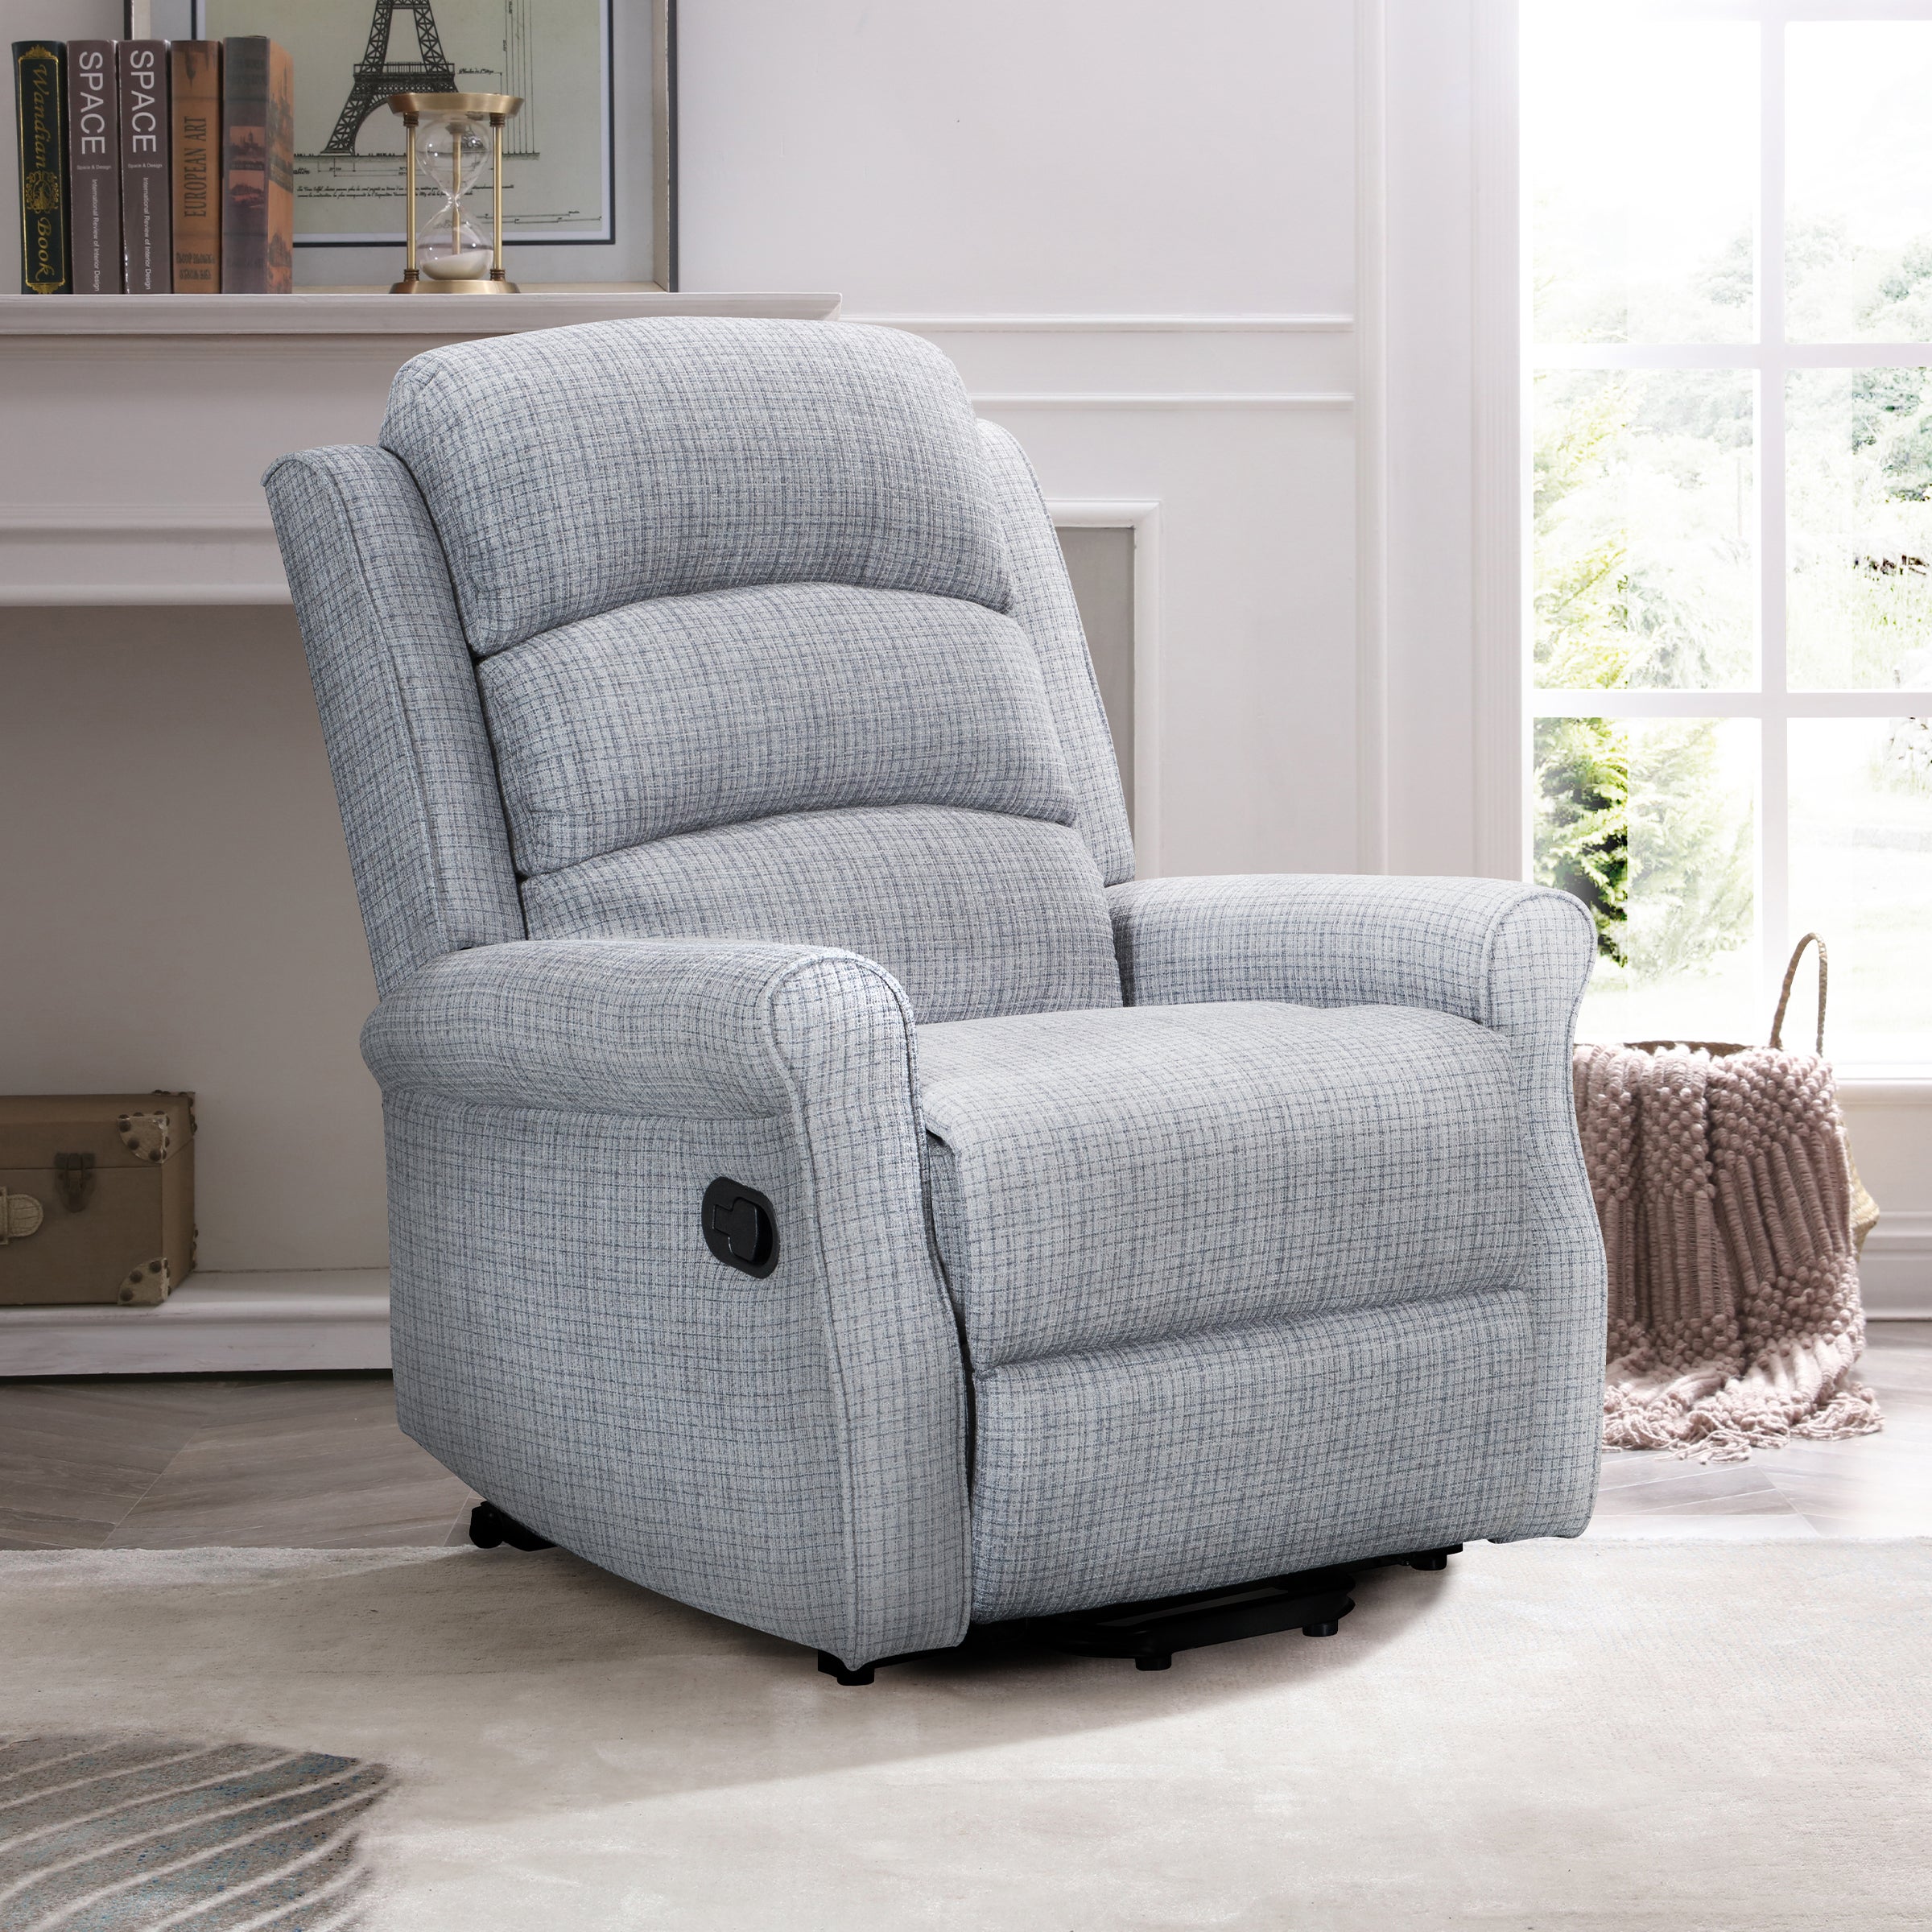 Ernest Textured Weave Recliner Chair Manual